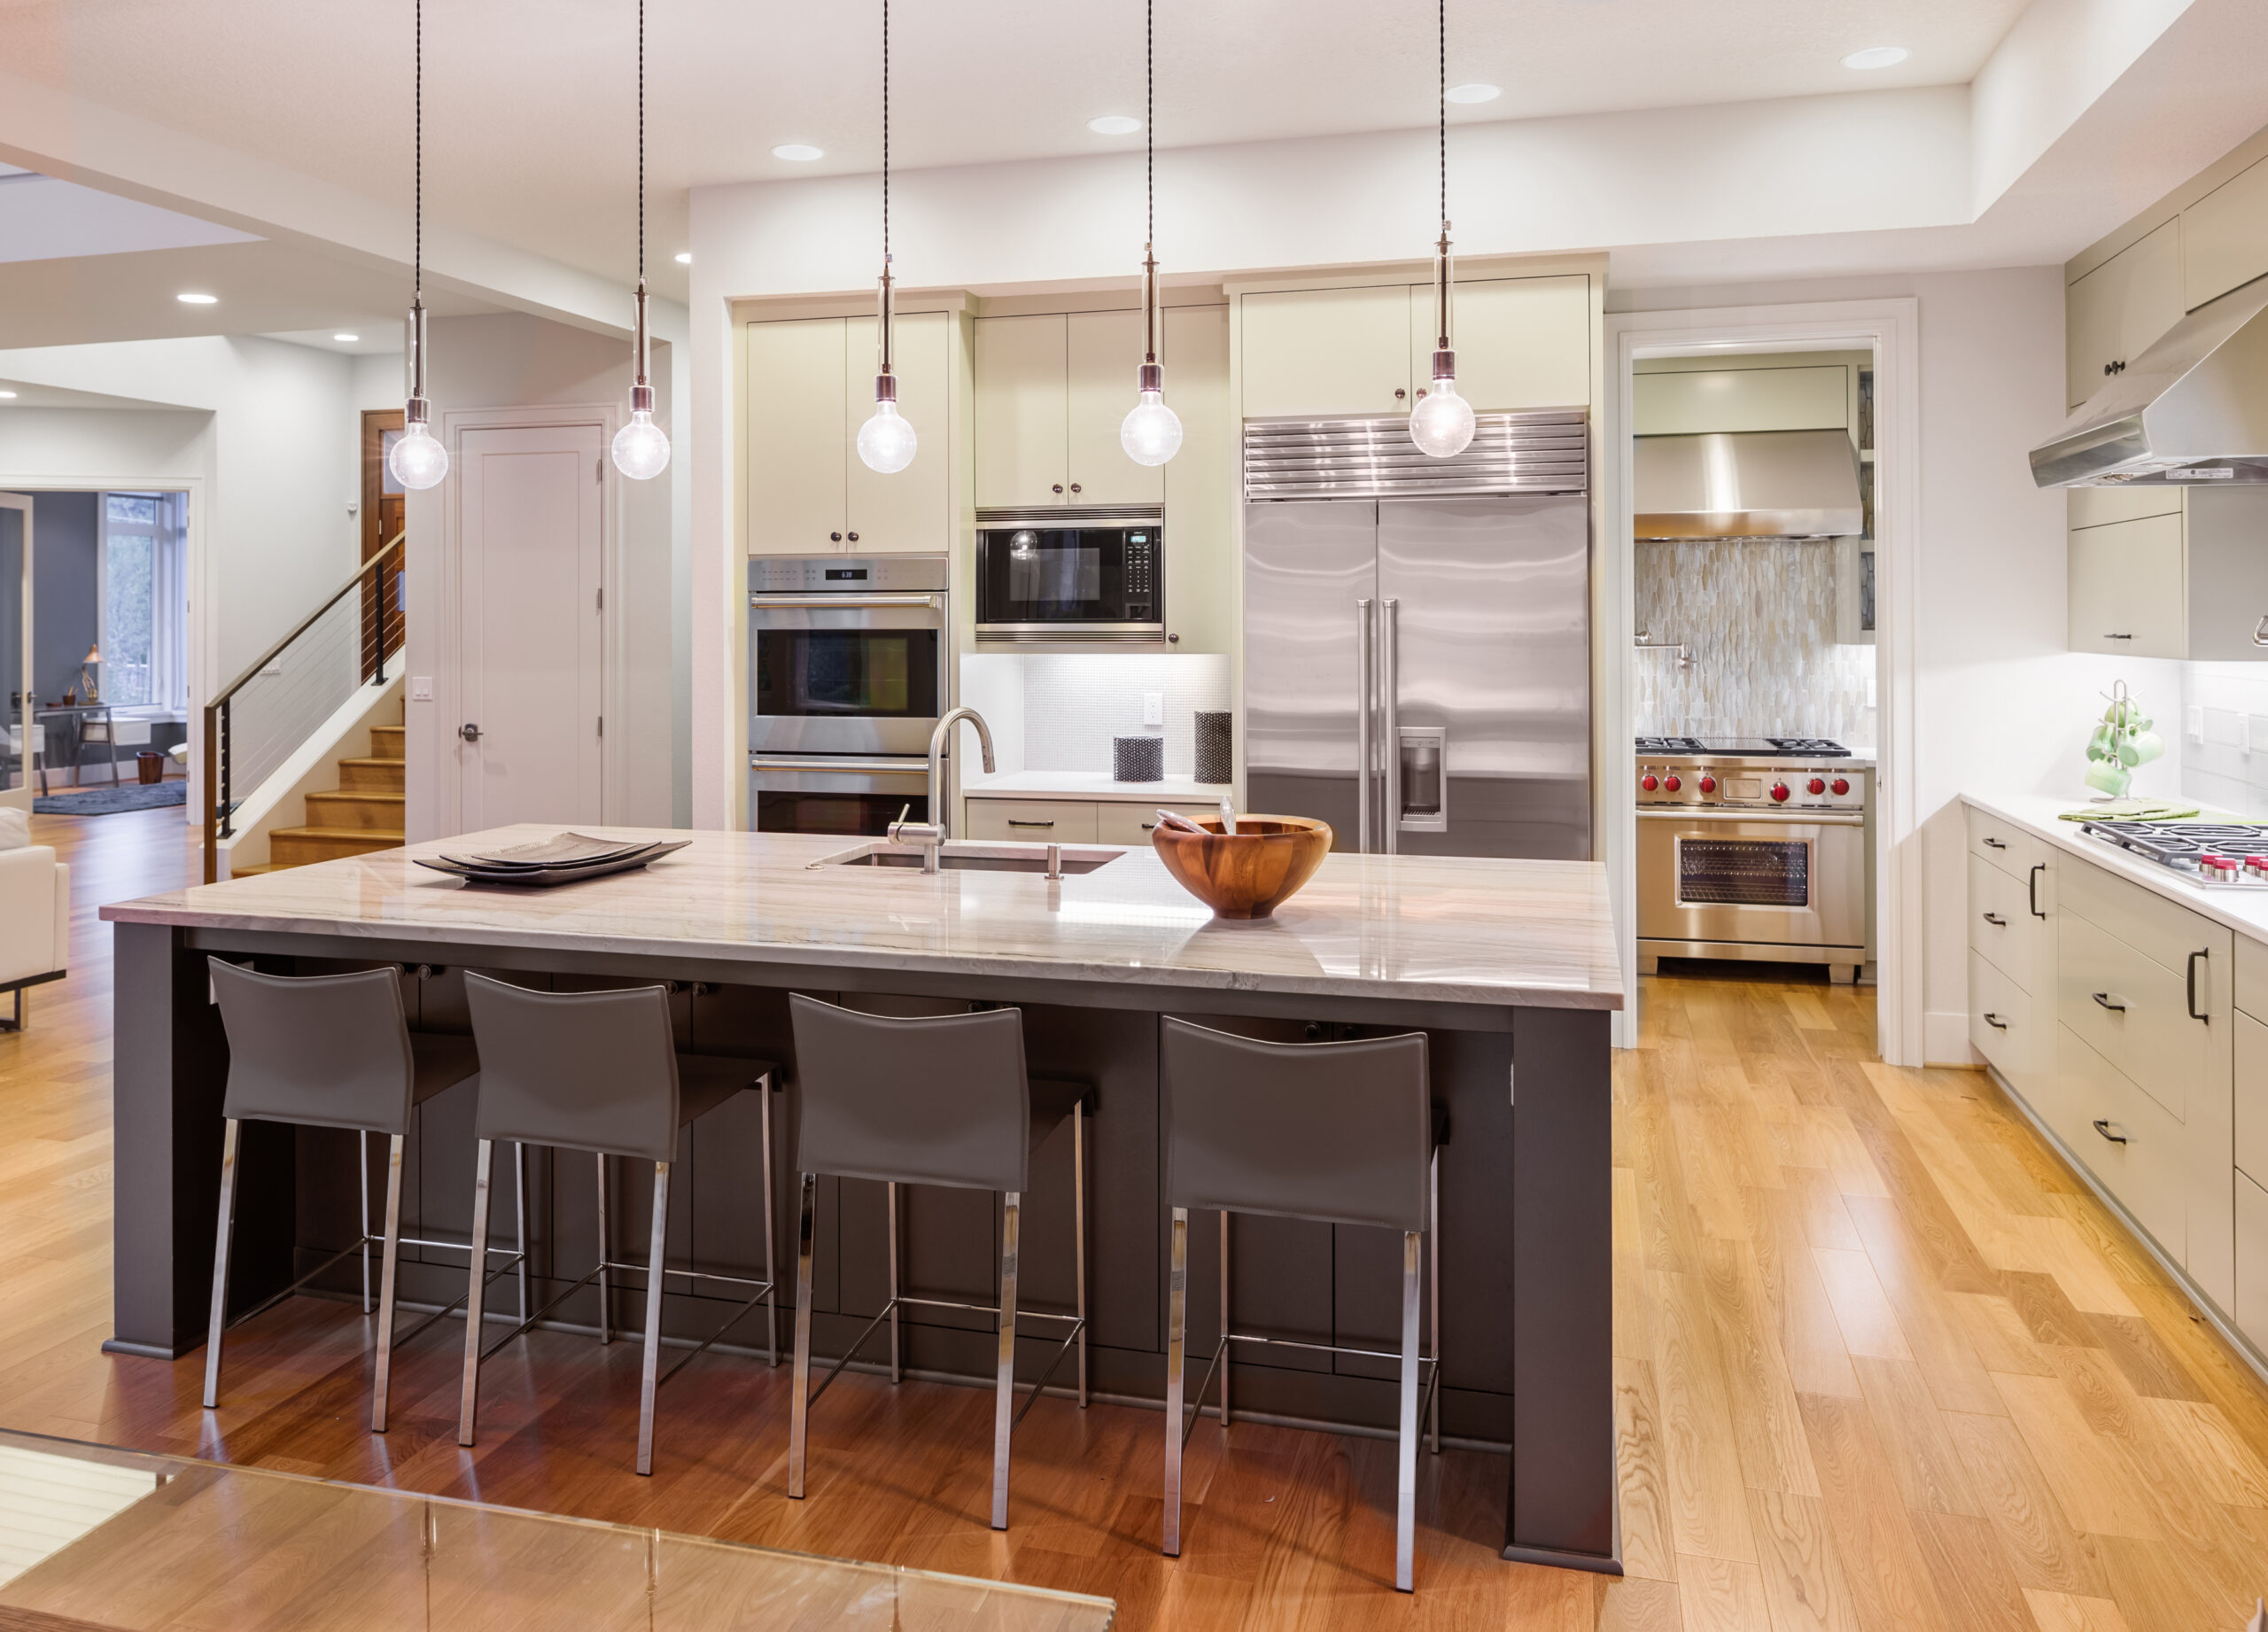 Discover the latest kitchen remodeling trends that will help you create a modern and stylish space. From smart appliances to open shelving, these must-haves will transform your kitchen into a functional and beautiful room.